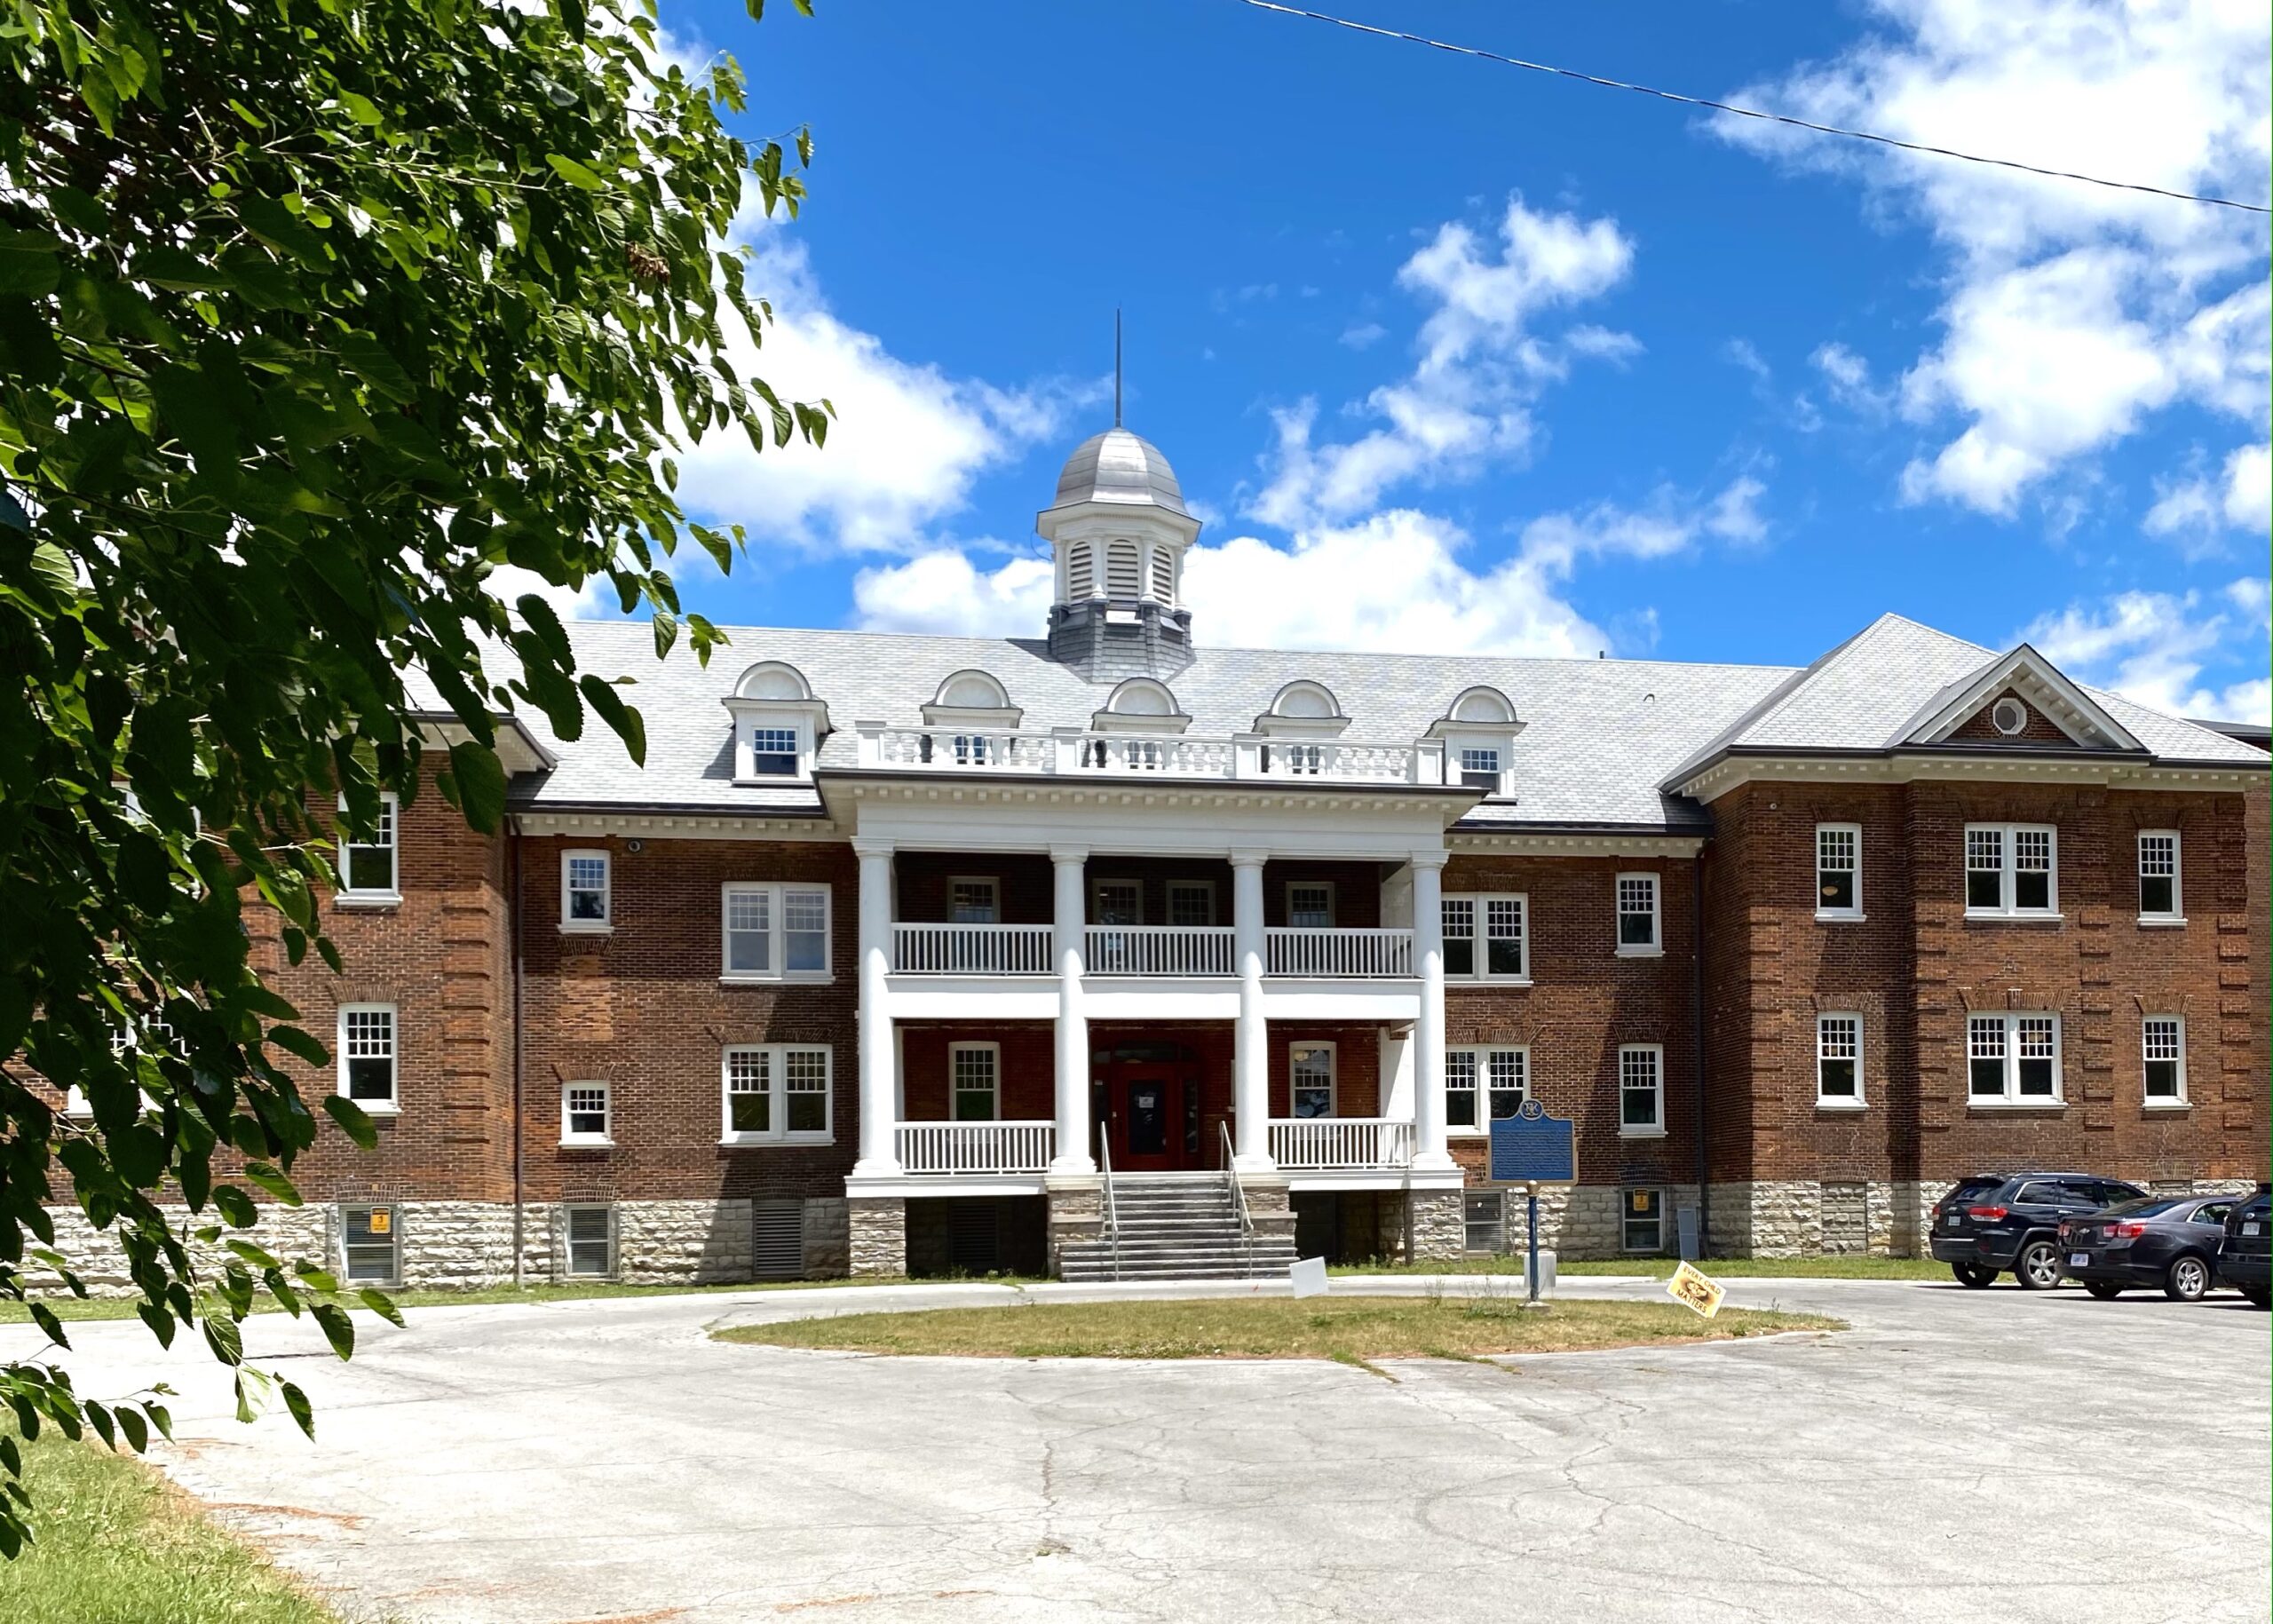 A photo of the Mohawk Institute Residential School in Brantford Ontario